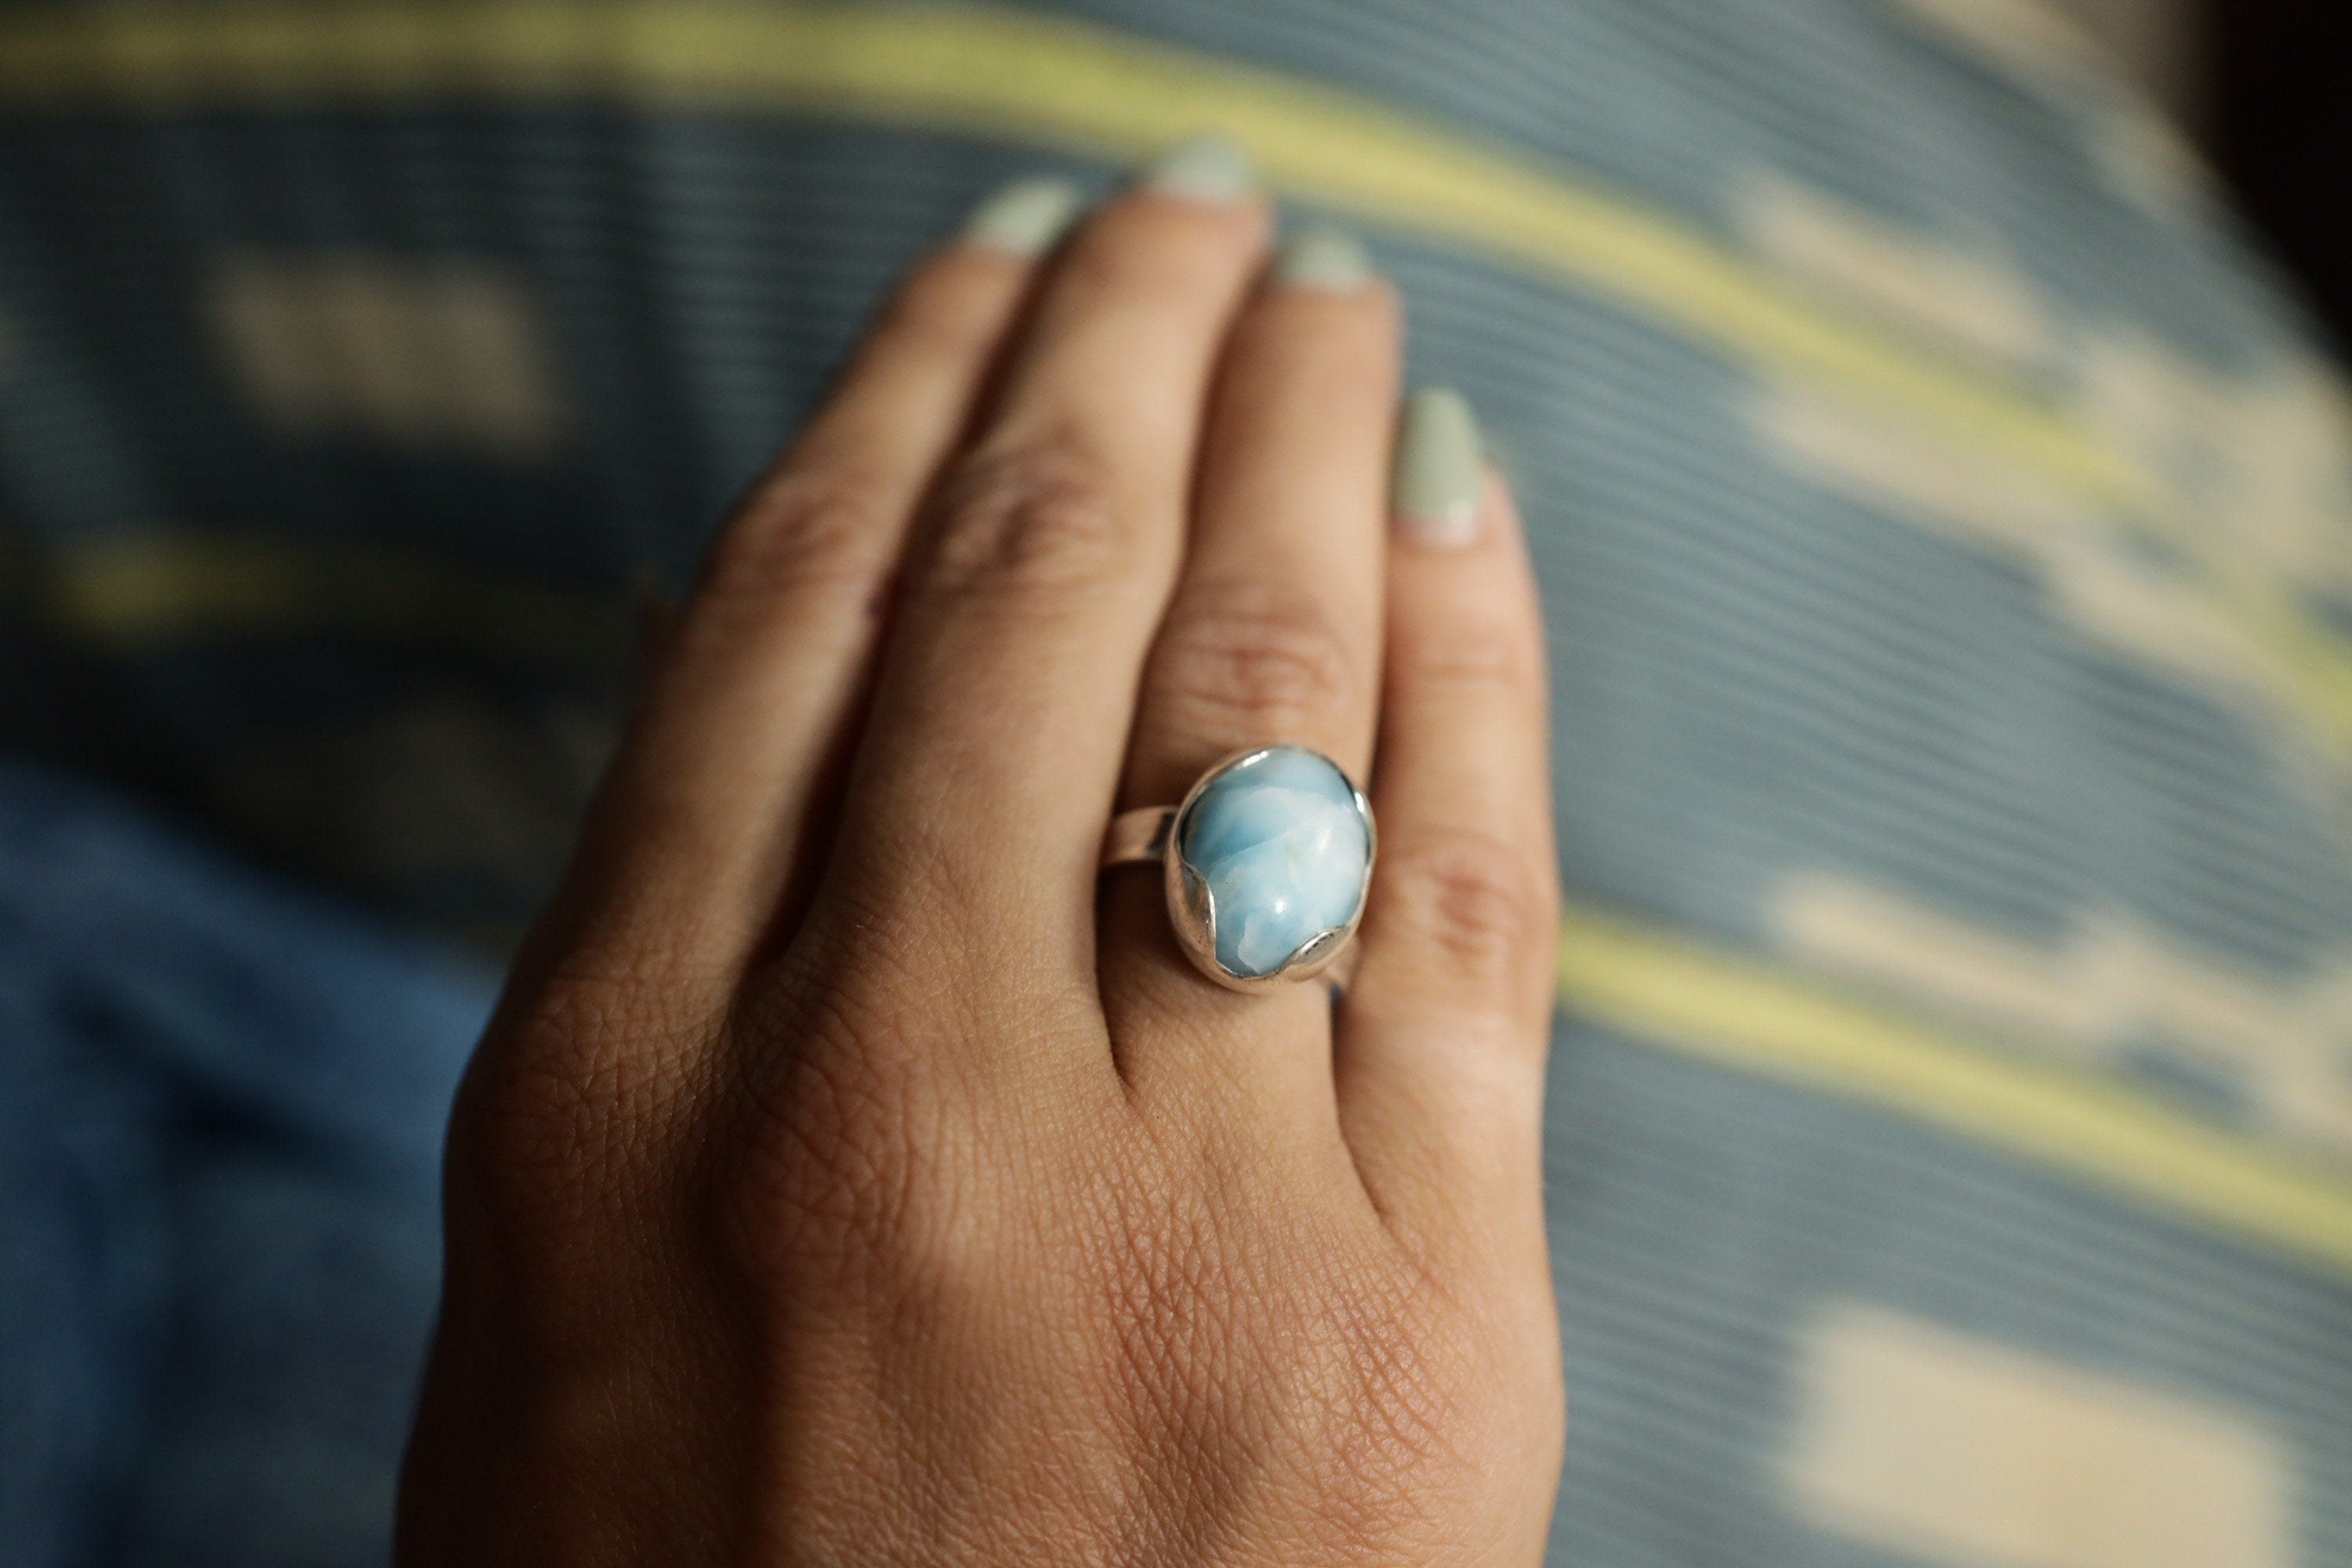 A Tribute to Oceanic Splendor: Adjustable Sterling Silver Ring with Oval Larimar - Unisex - Size 5-12 US - NO/04